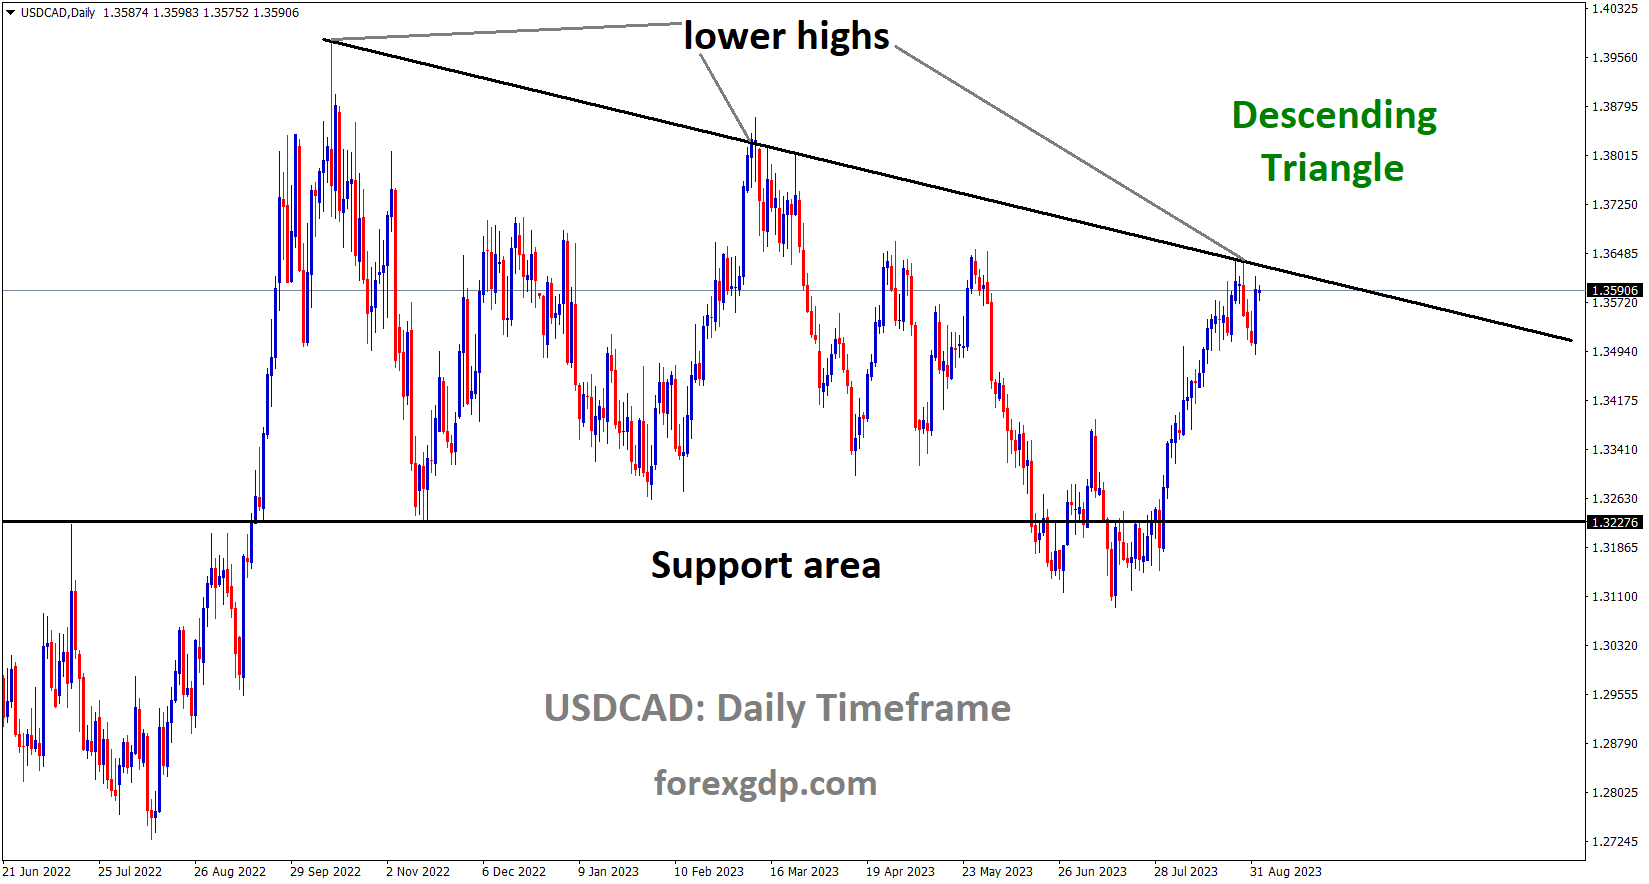 USDCAD is moving in the Descending triangle pattern and the market has reached the lower high area of the pattern